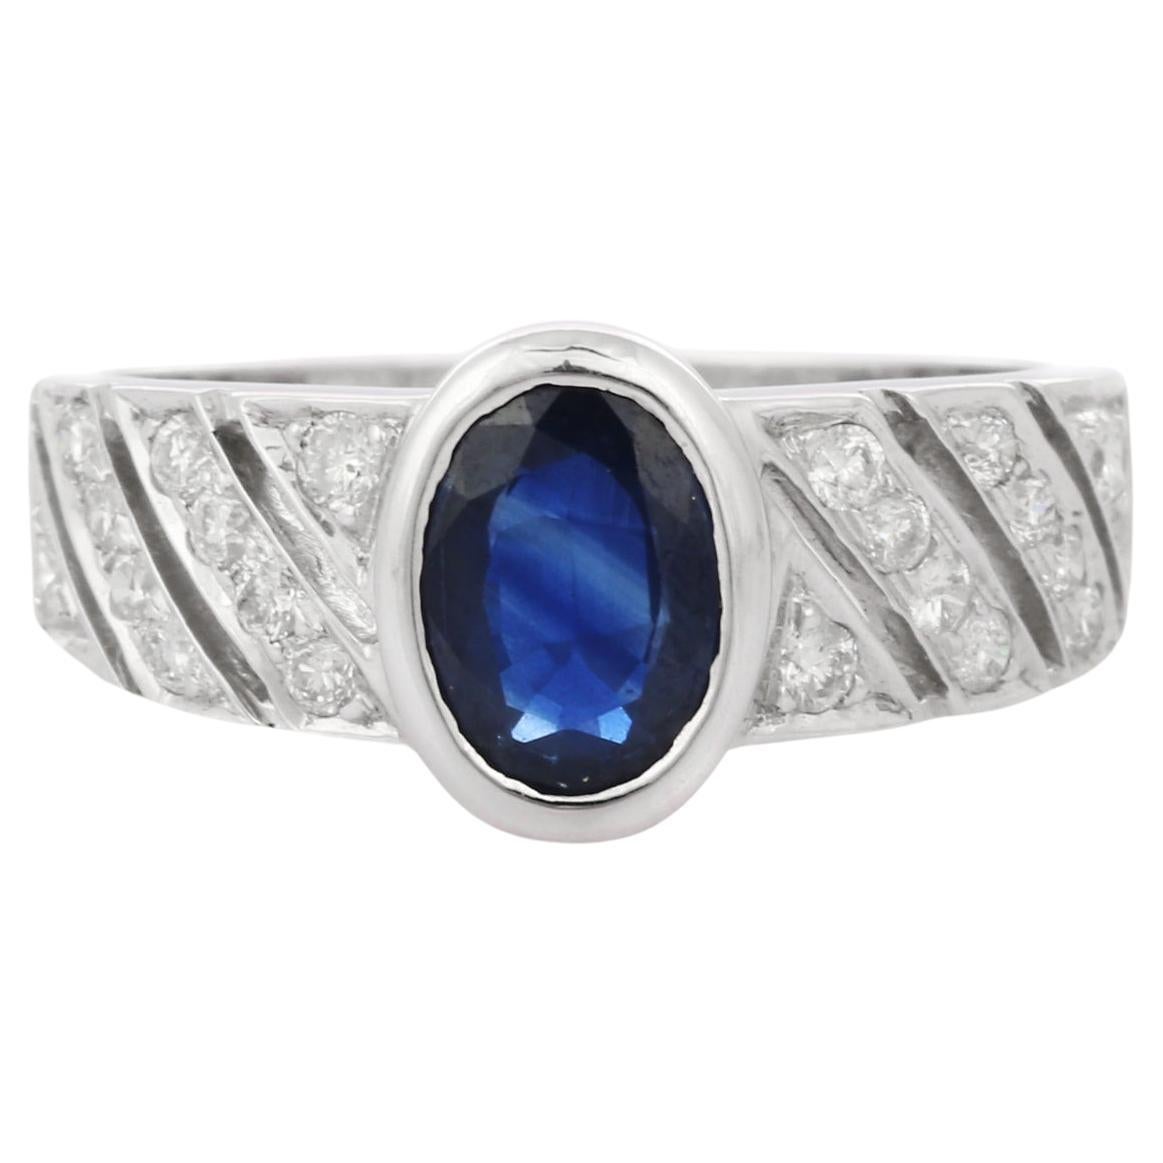 For Sale:  Exquisite Deep Blue Sapphire Diamond Unisex Engagement Ring in 18k White Gold